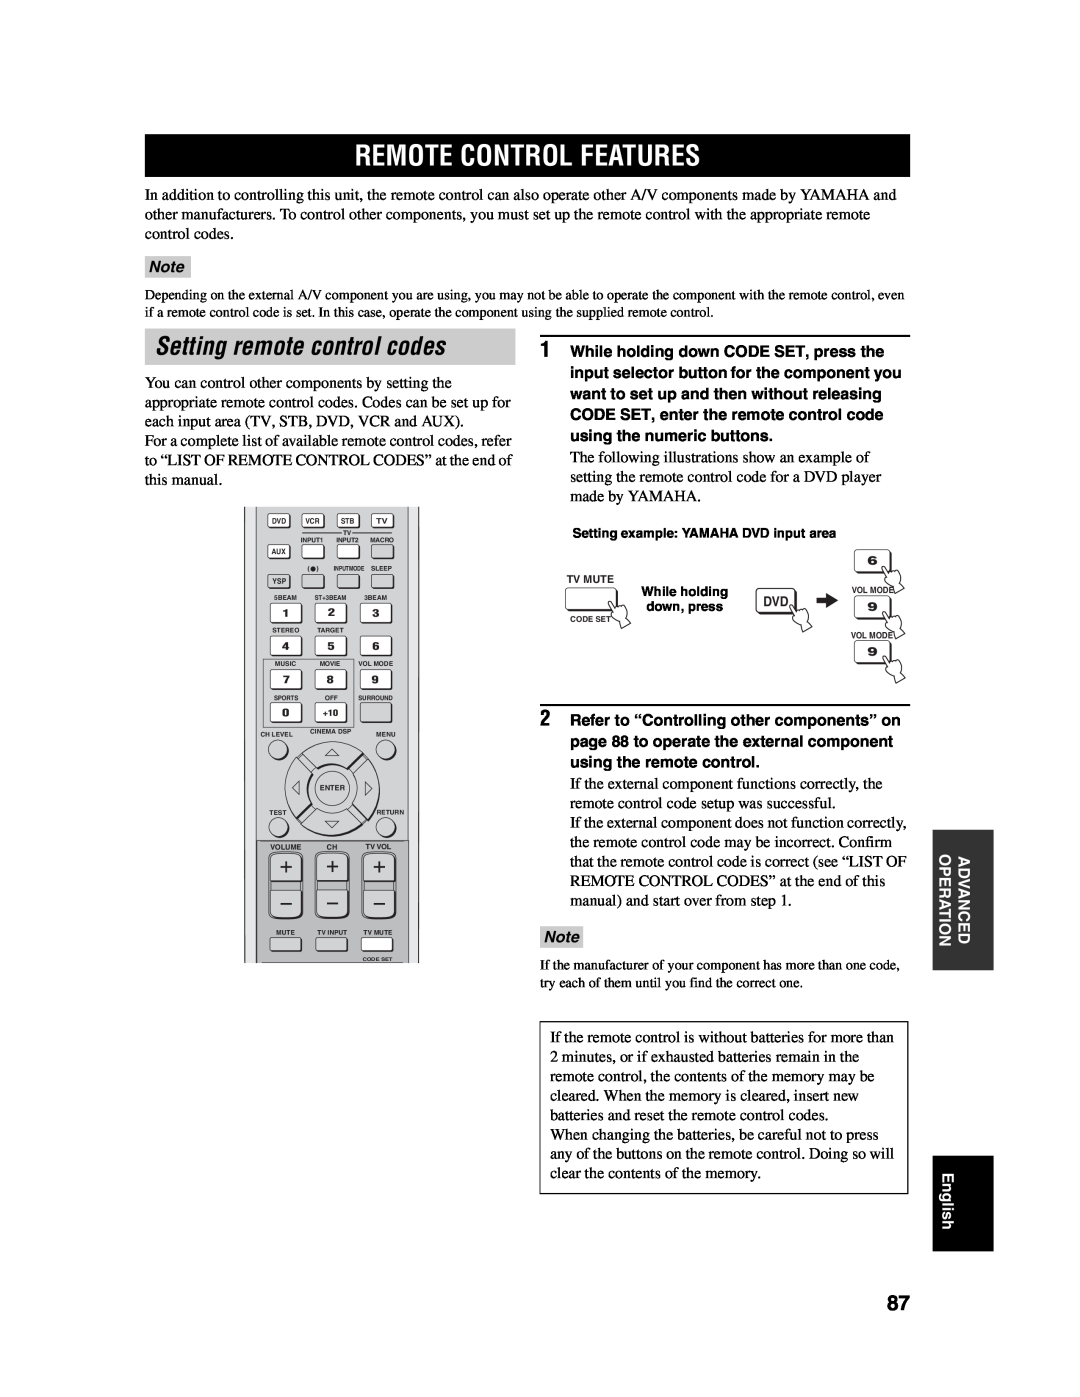 Yamaha YSP-1000 owner manual Remote Control Features, Setting remote control codes 